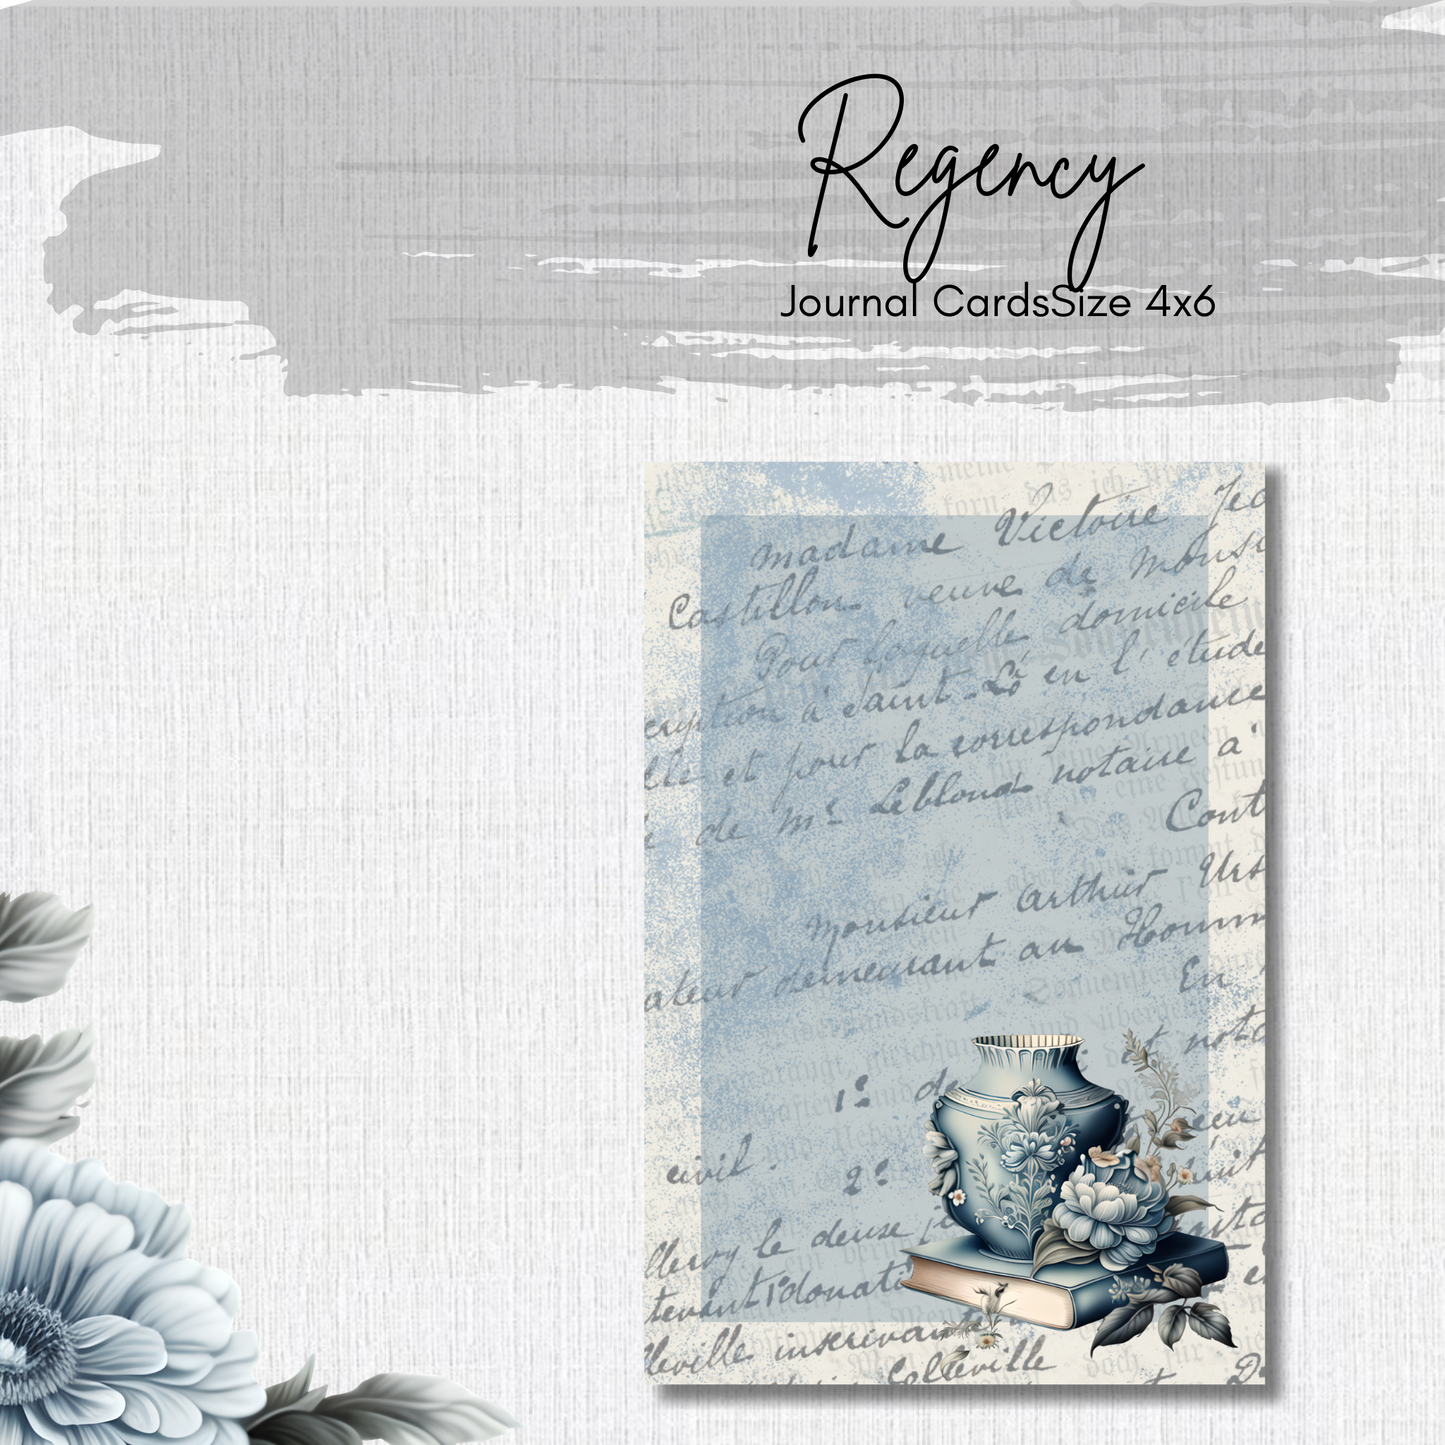 Journal Cards - Regency Collection